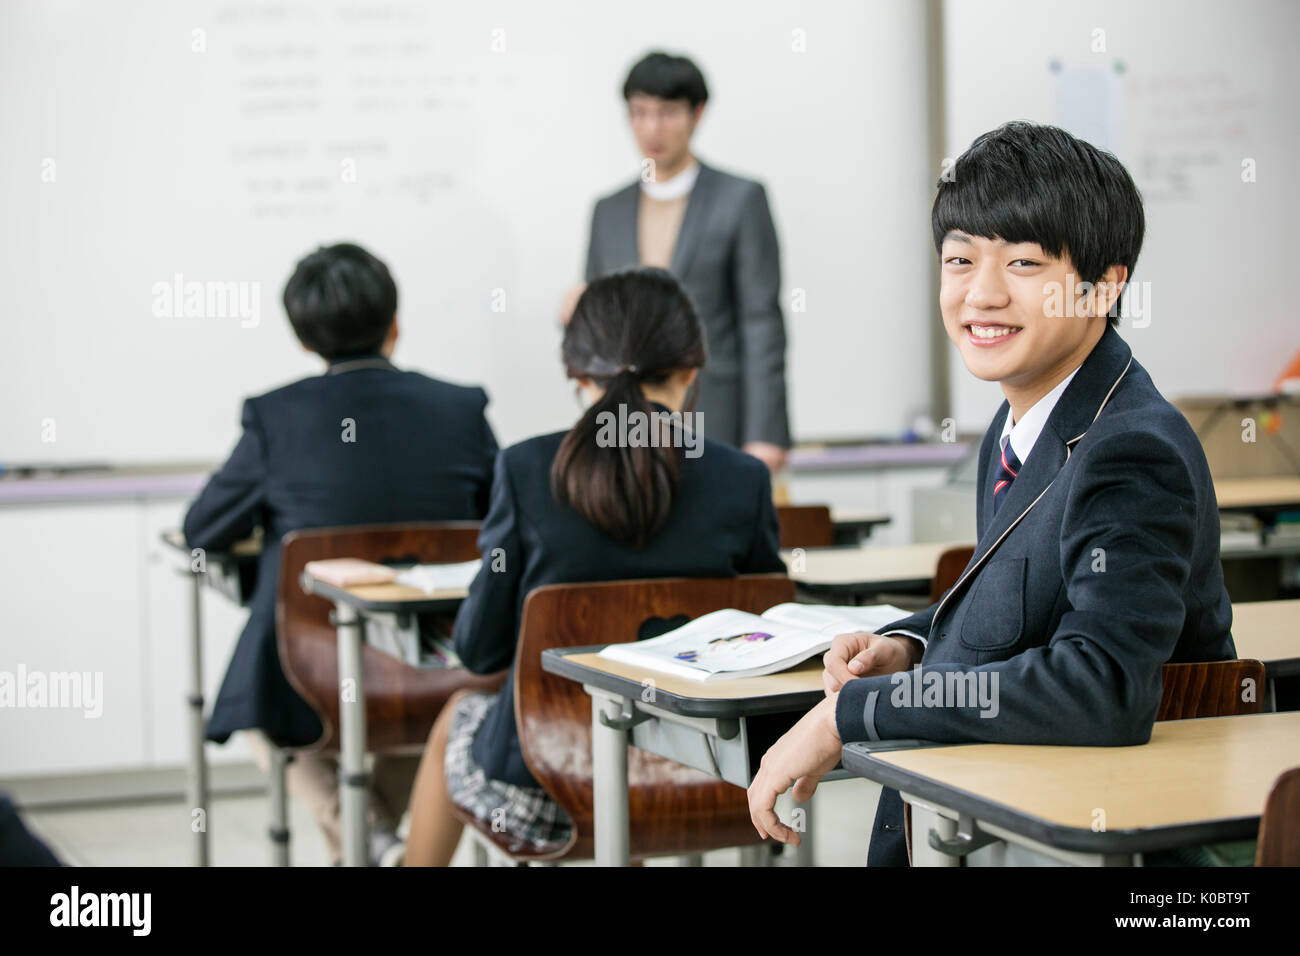 Portrait of smiling school boy with his classmates and teacher in classroom Stock Photo